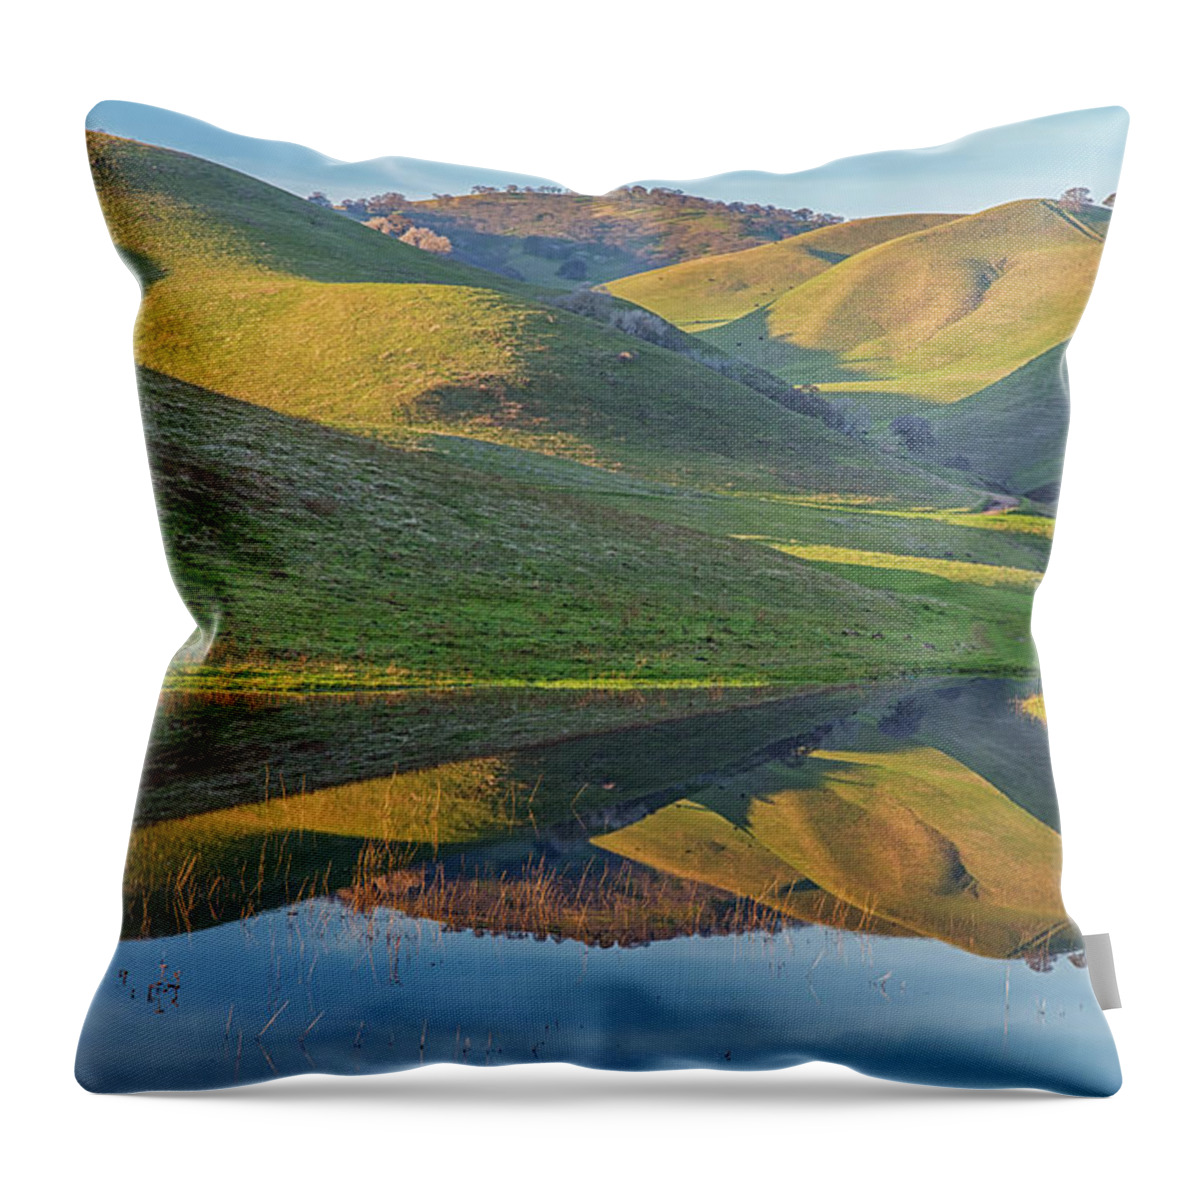 California Throw Pillow featuring the photograph Black Diamond Morning Reflection by Marc Crumpler